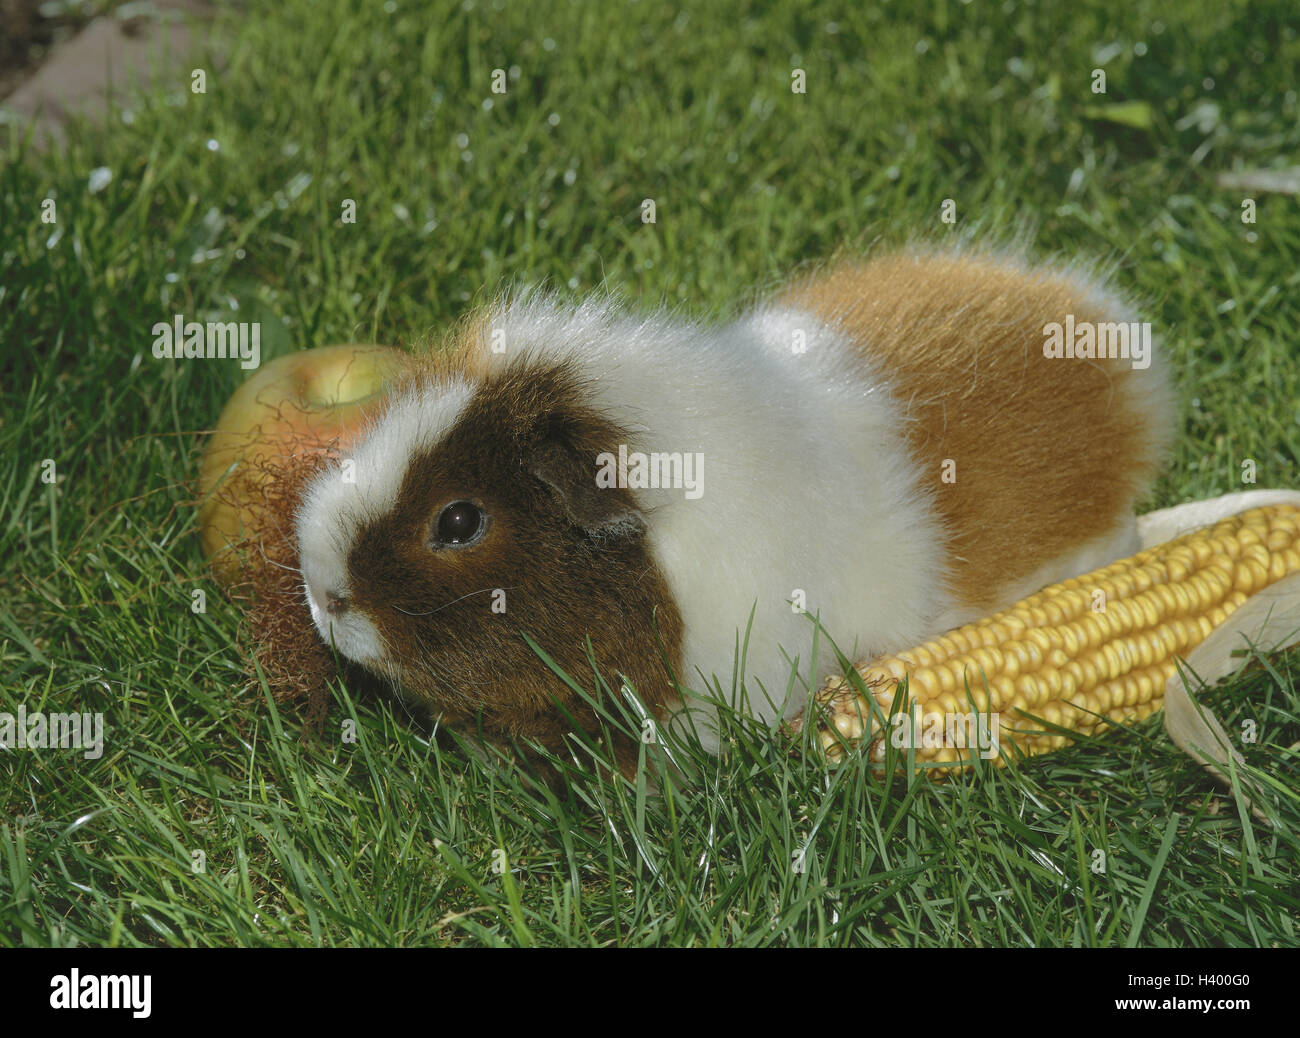 Meadow, guinea pig, three-coloured, garden, sea pig, Cavia aperea porcellus, rodents, rodent, rodent, pets, pet, grass, apple, corncob Stock Photo